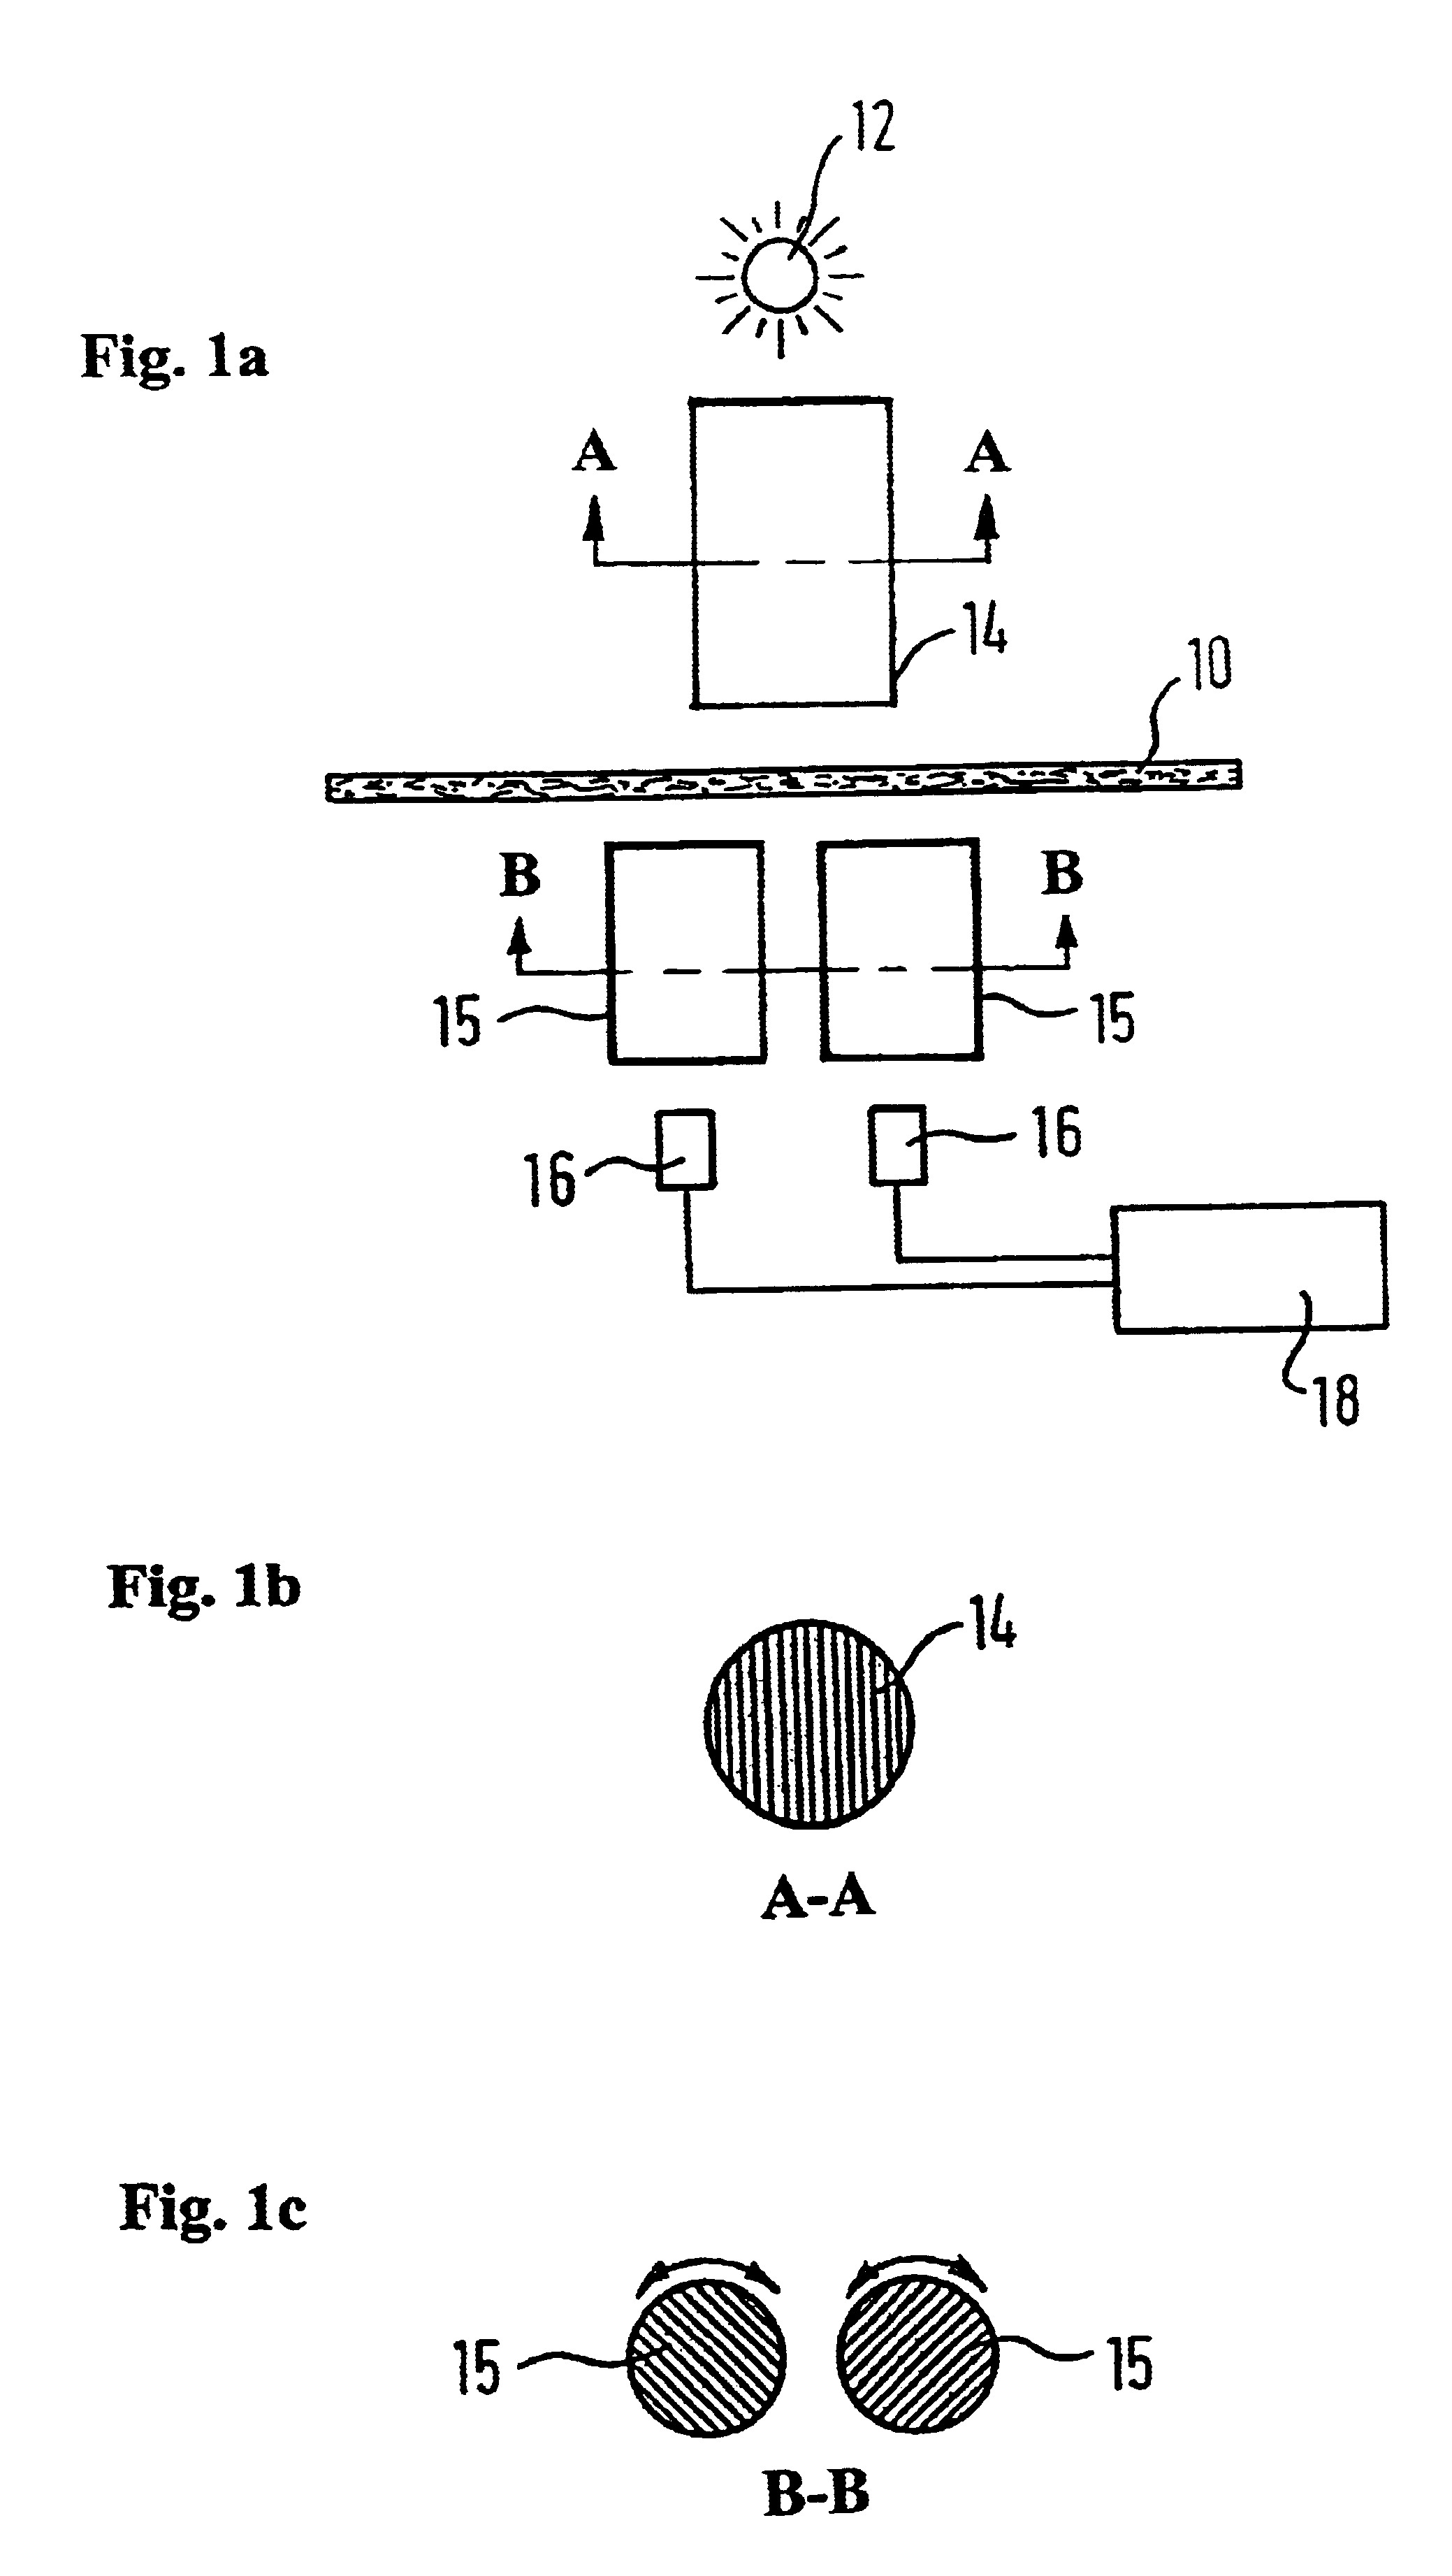 System and method for determining fiber orientation in fibrous material webs